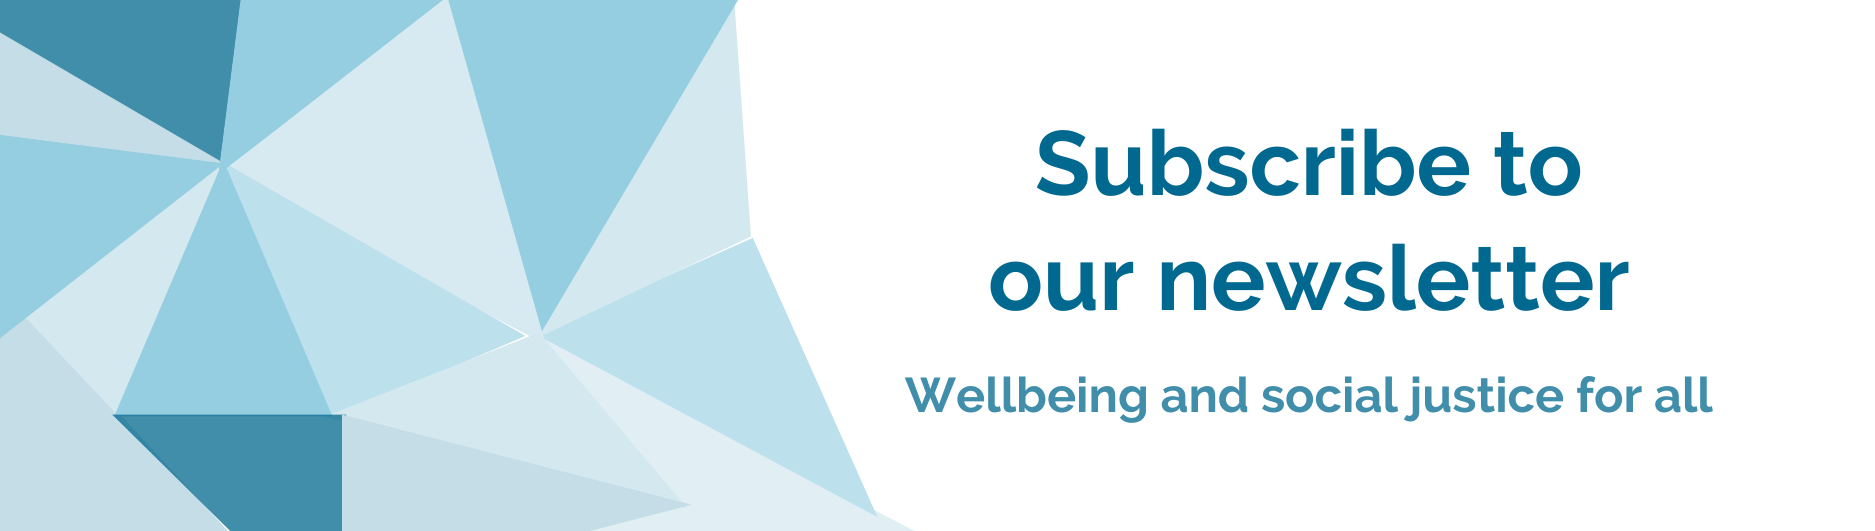 Subscribe to our newsletter: Wellbeing and social justice for all